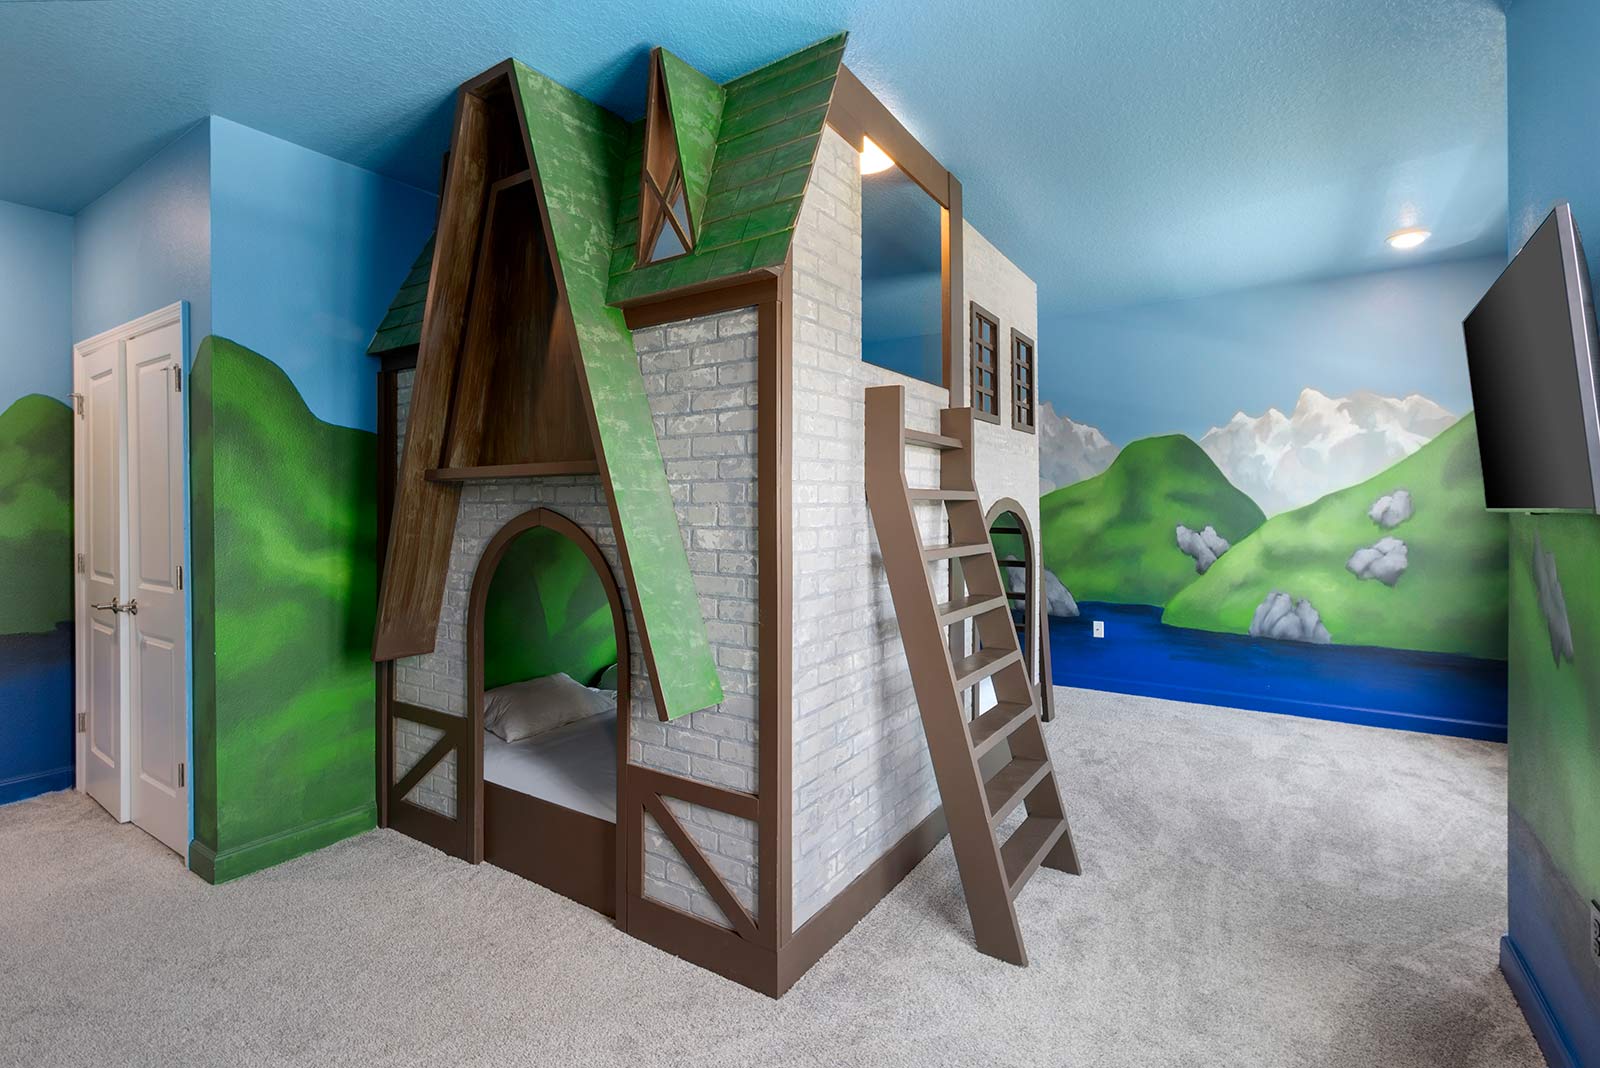 Storybook Themed Bedroom